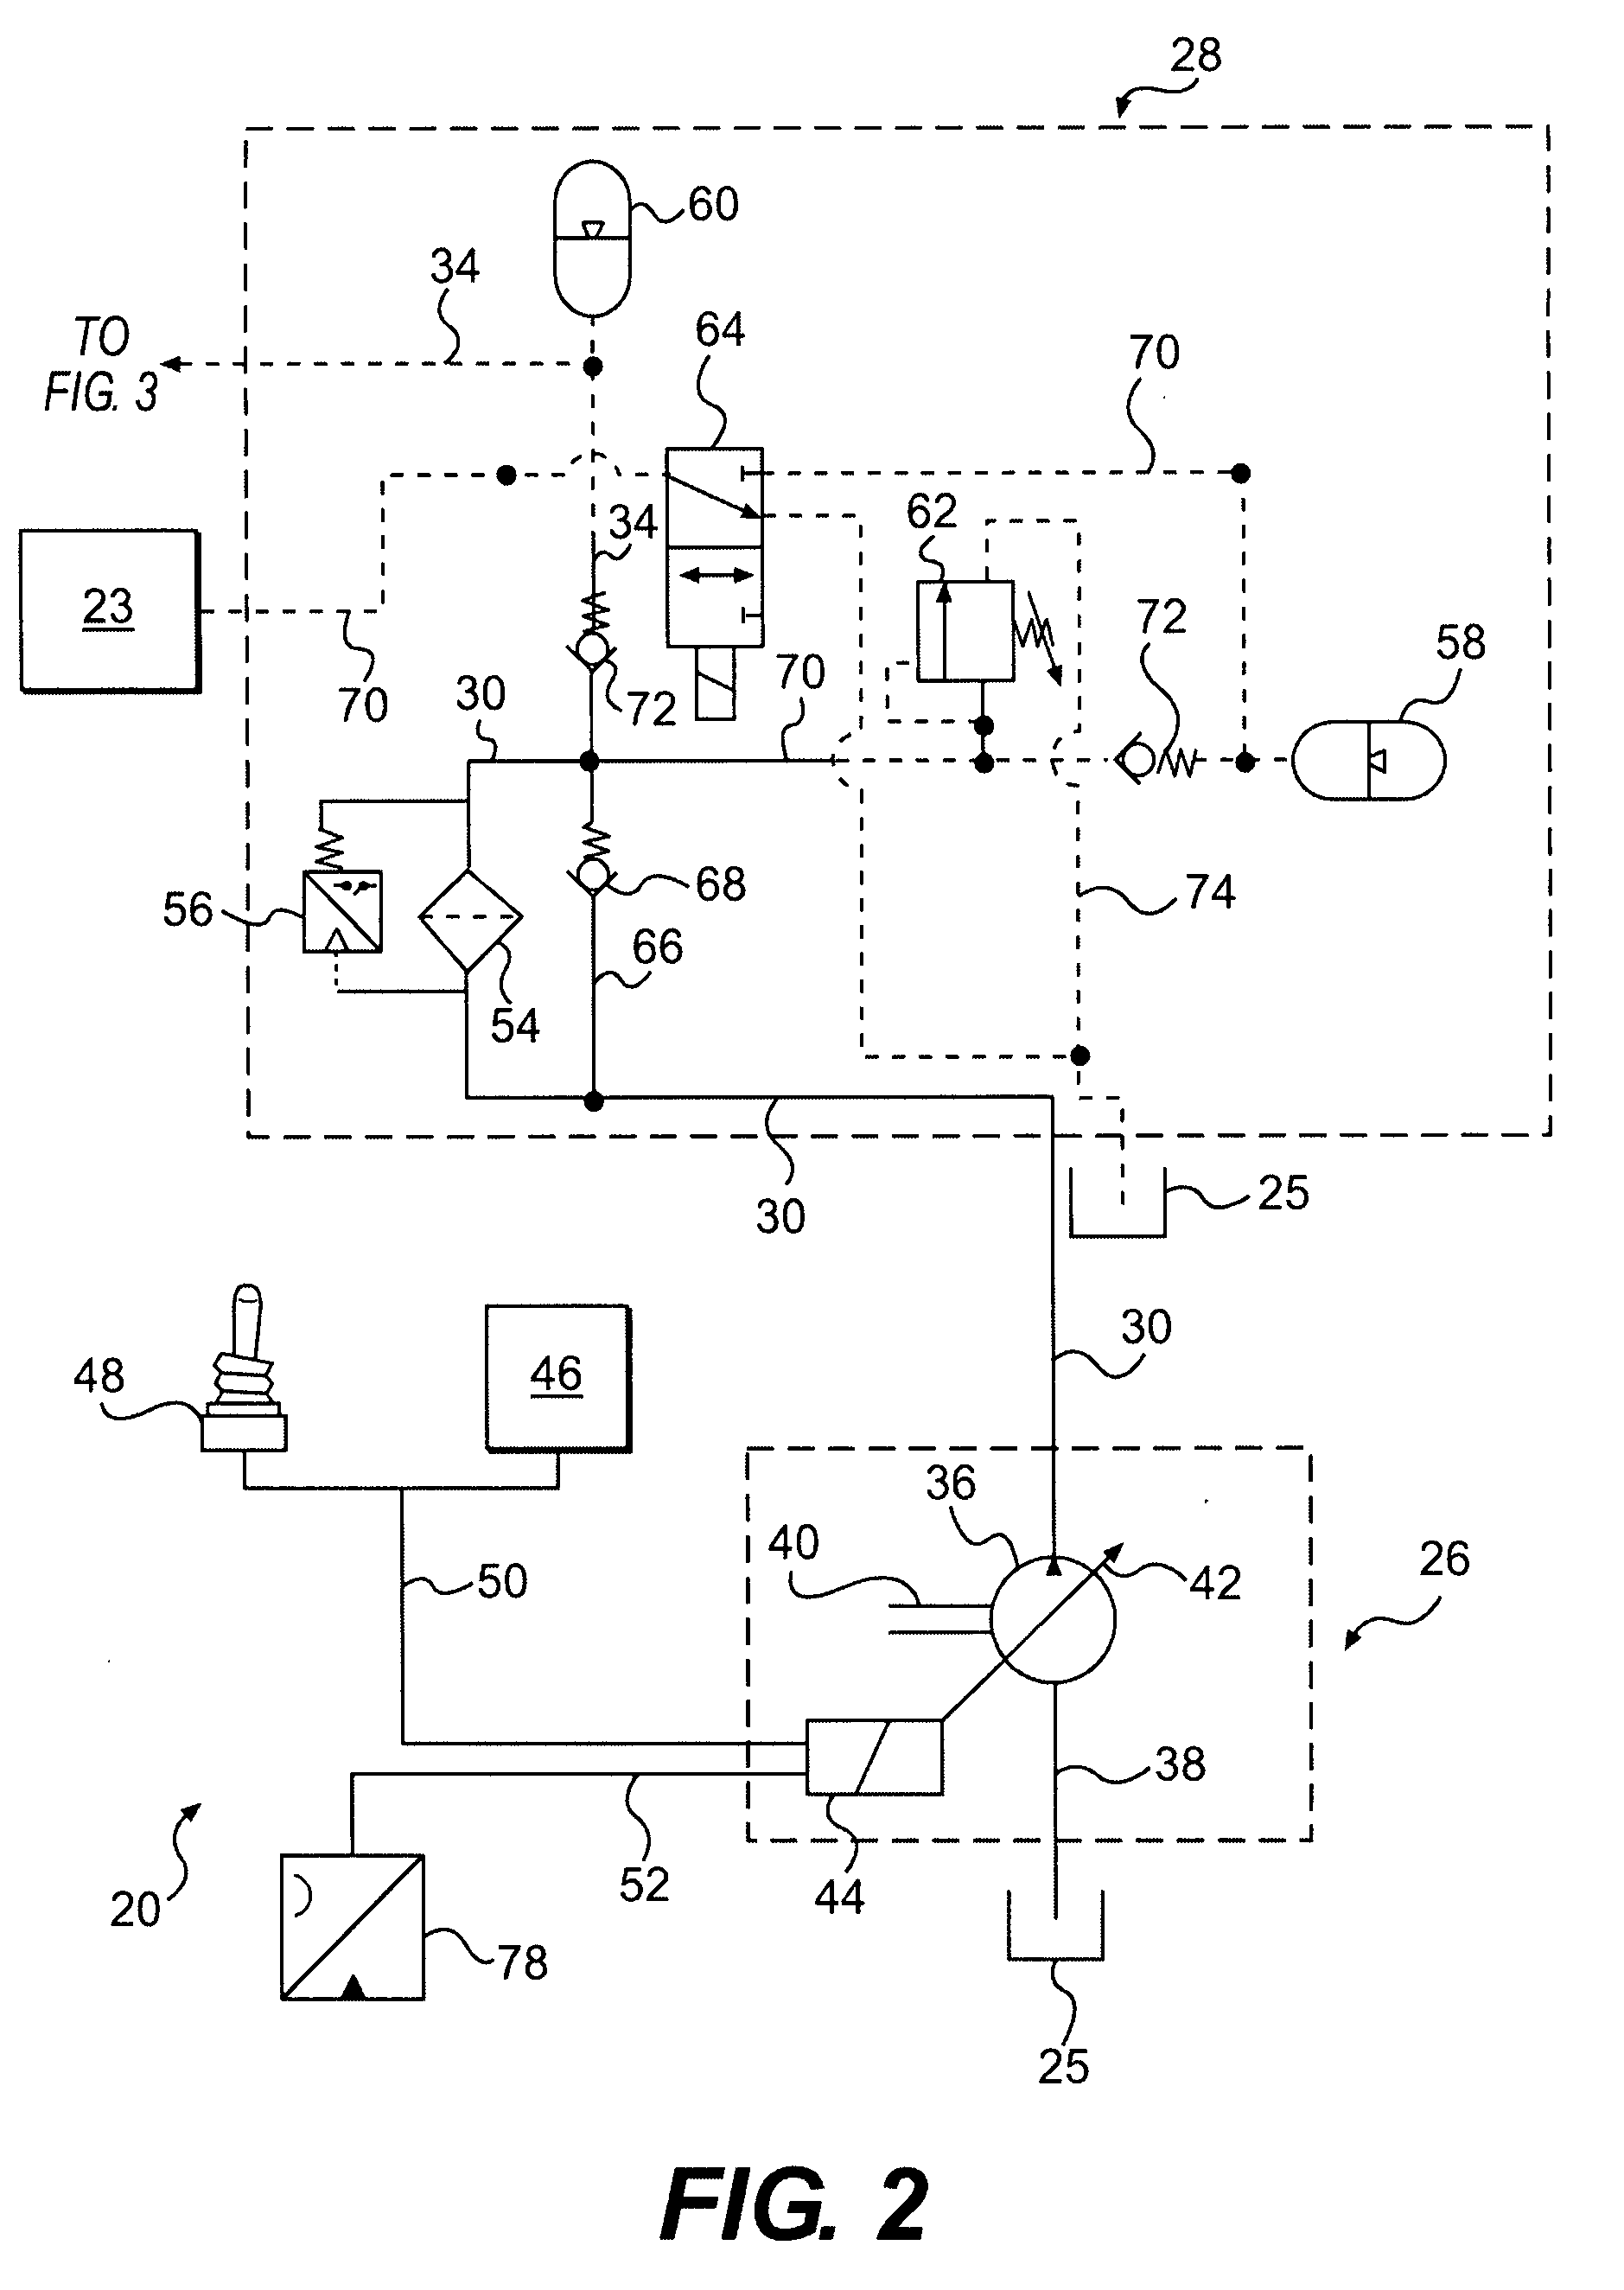 Hydrostatic drive system with variable charge pump